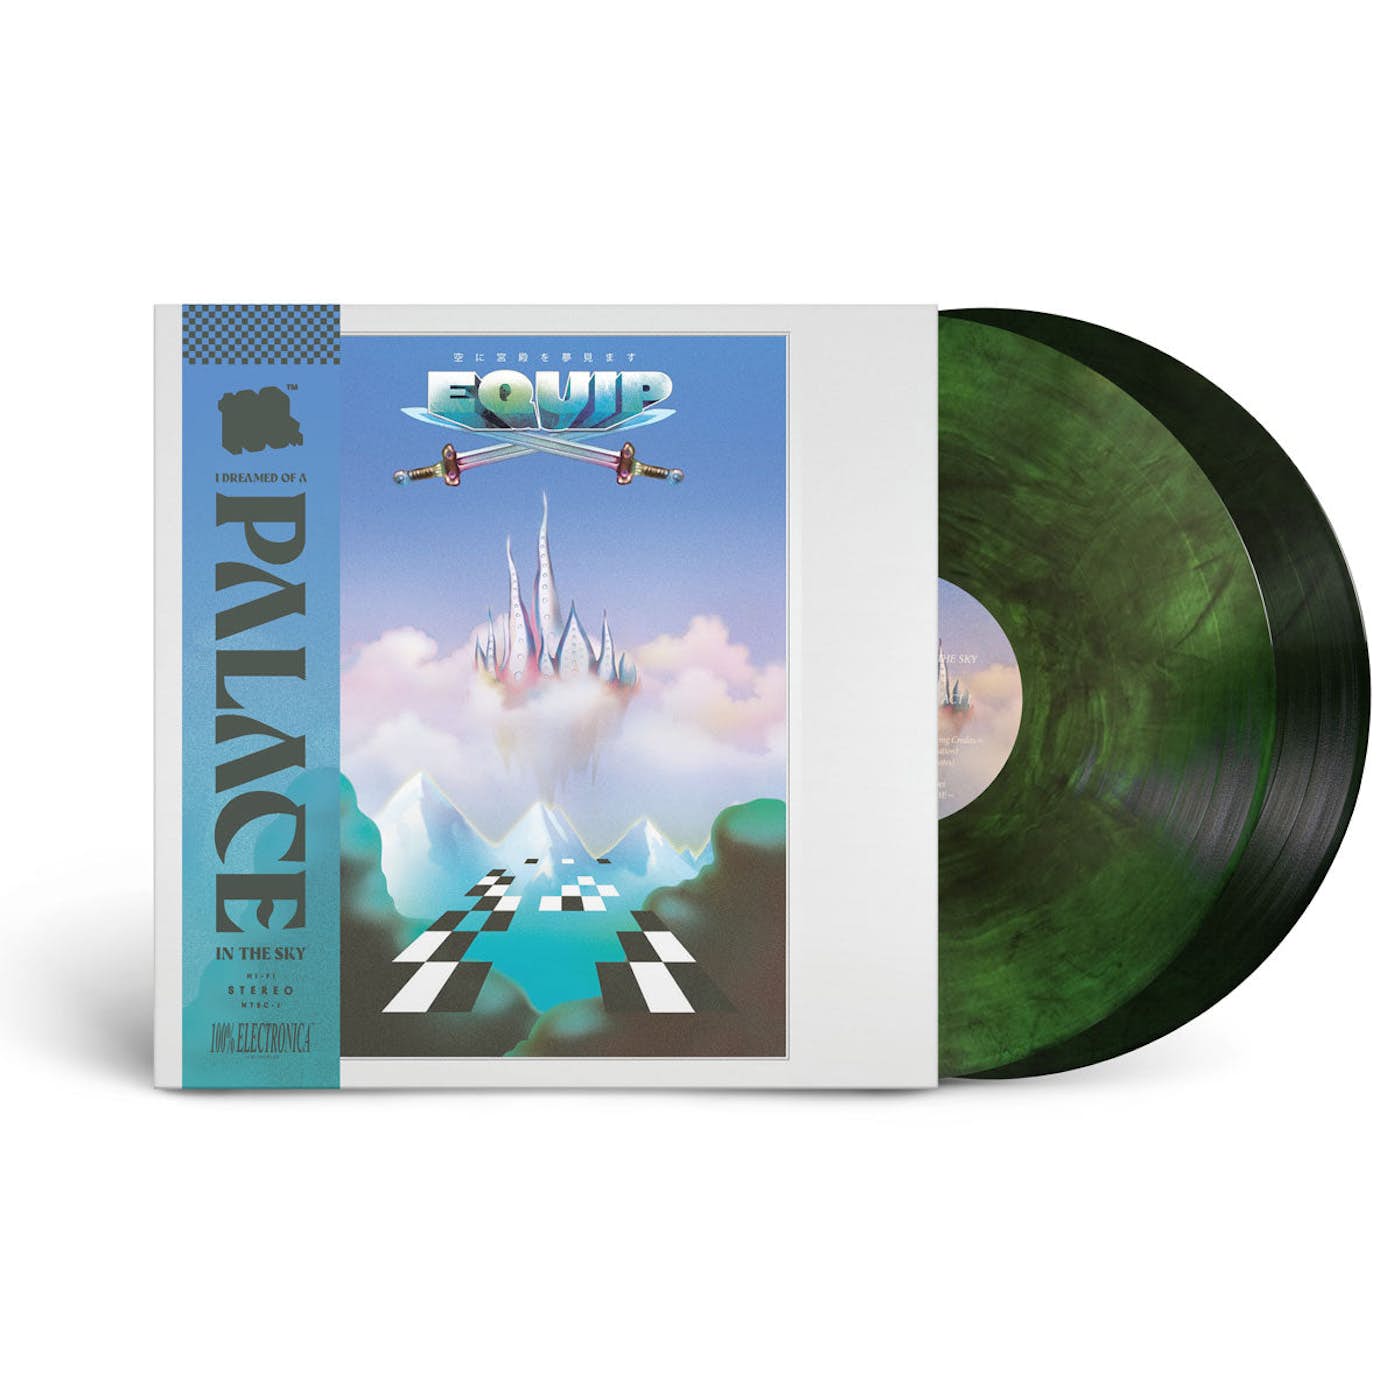 [SOLD OUT] EQUIP "I Dreamed Of A Palace In The Sky" vinyl 2xLP (color, double LP gatefold)